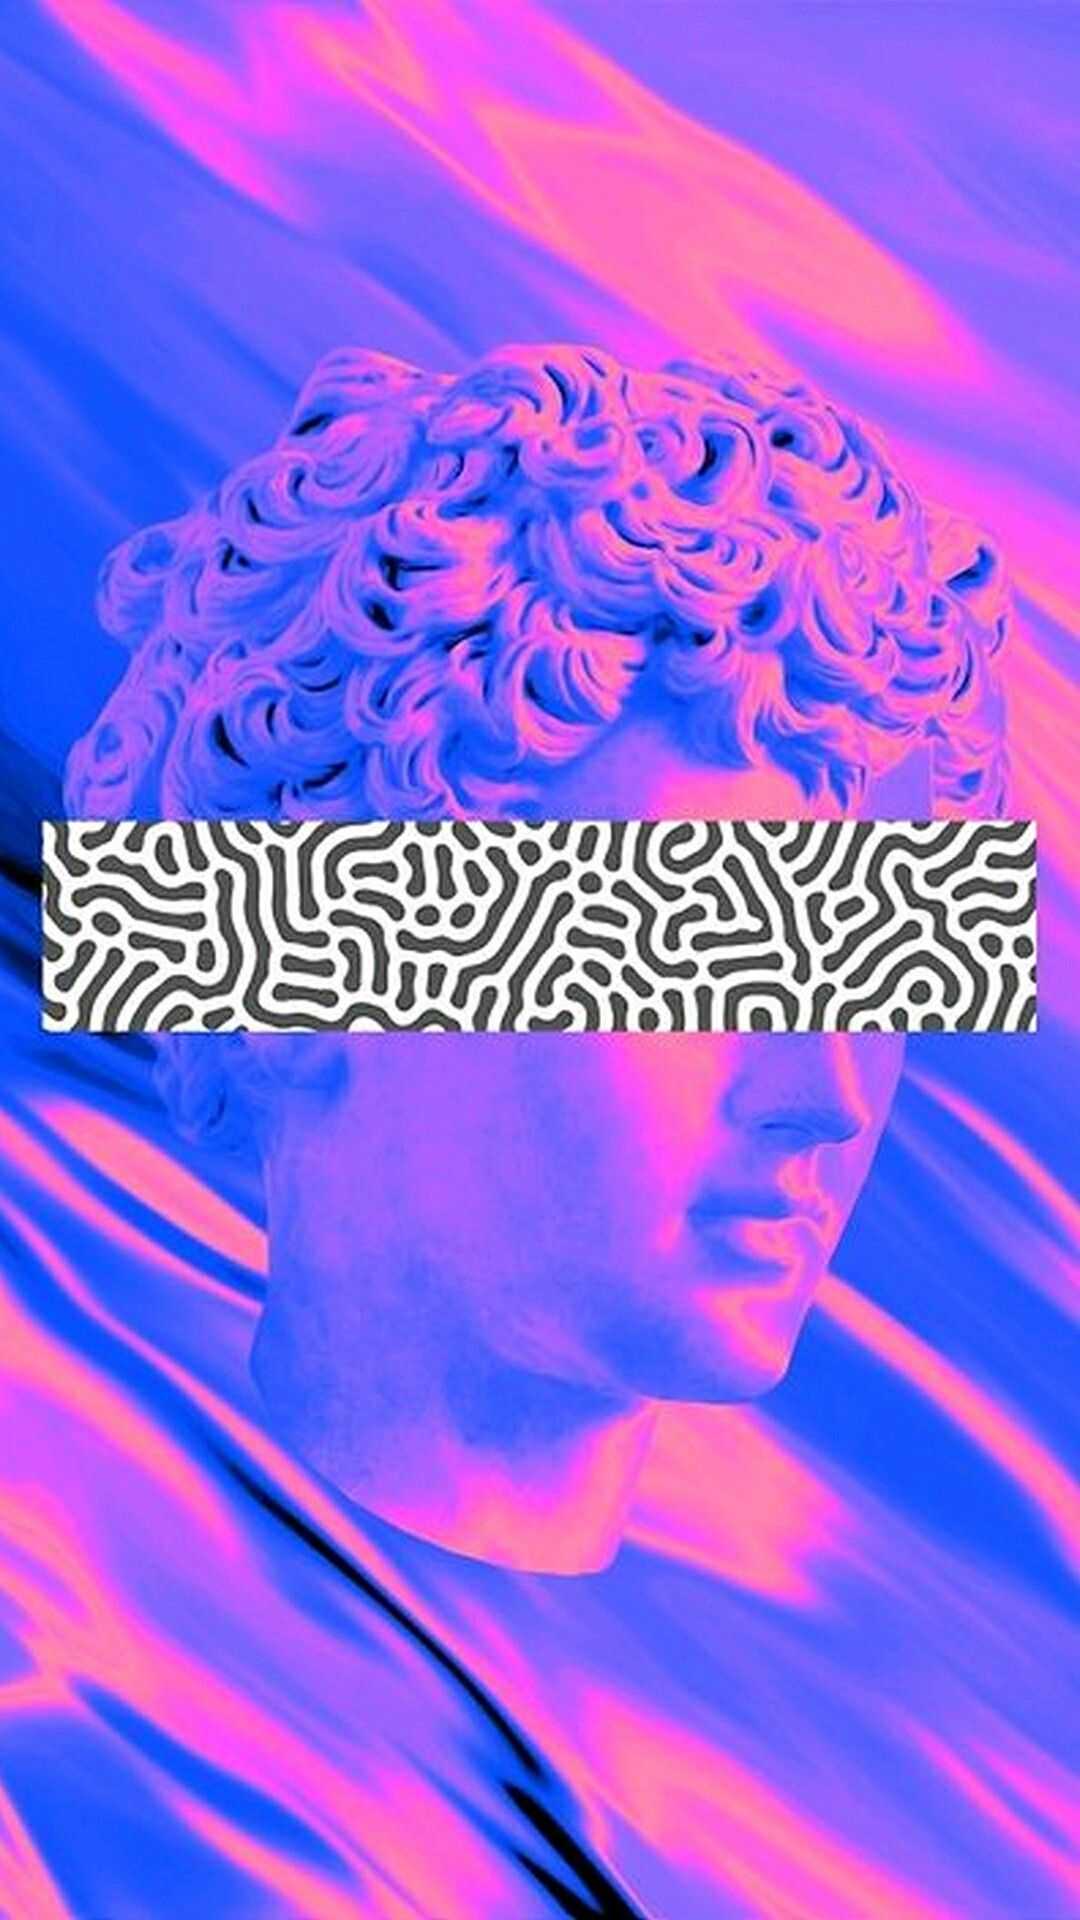 IPhone wallpaper of a sculpture with a neon purple and blue background - Vaporwave, Greek statue